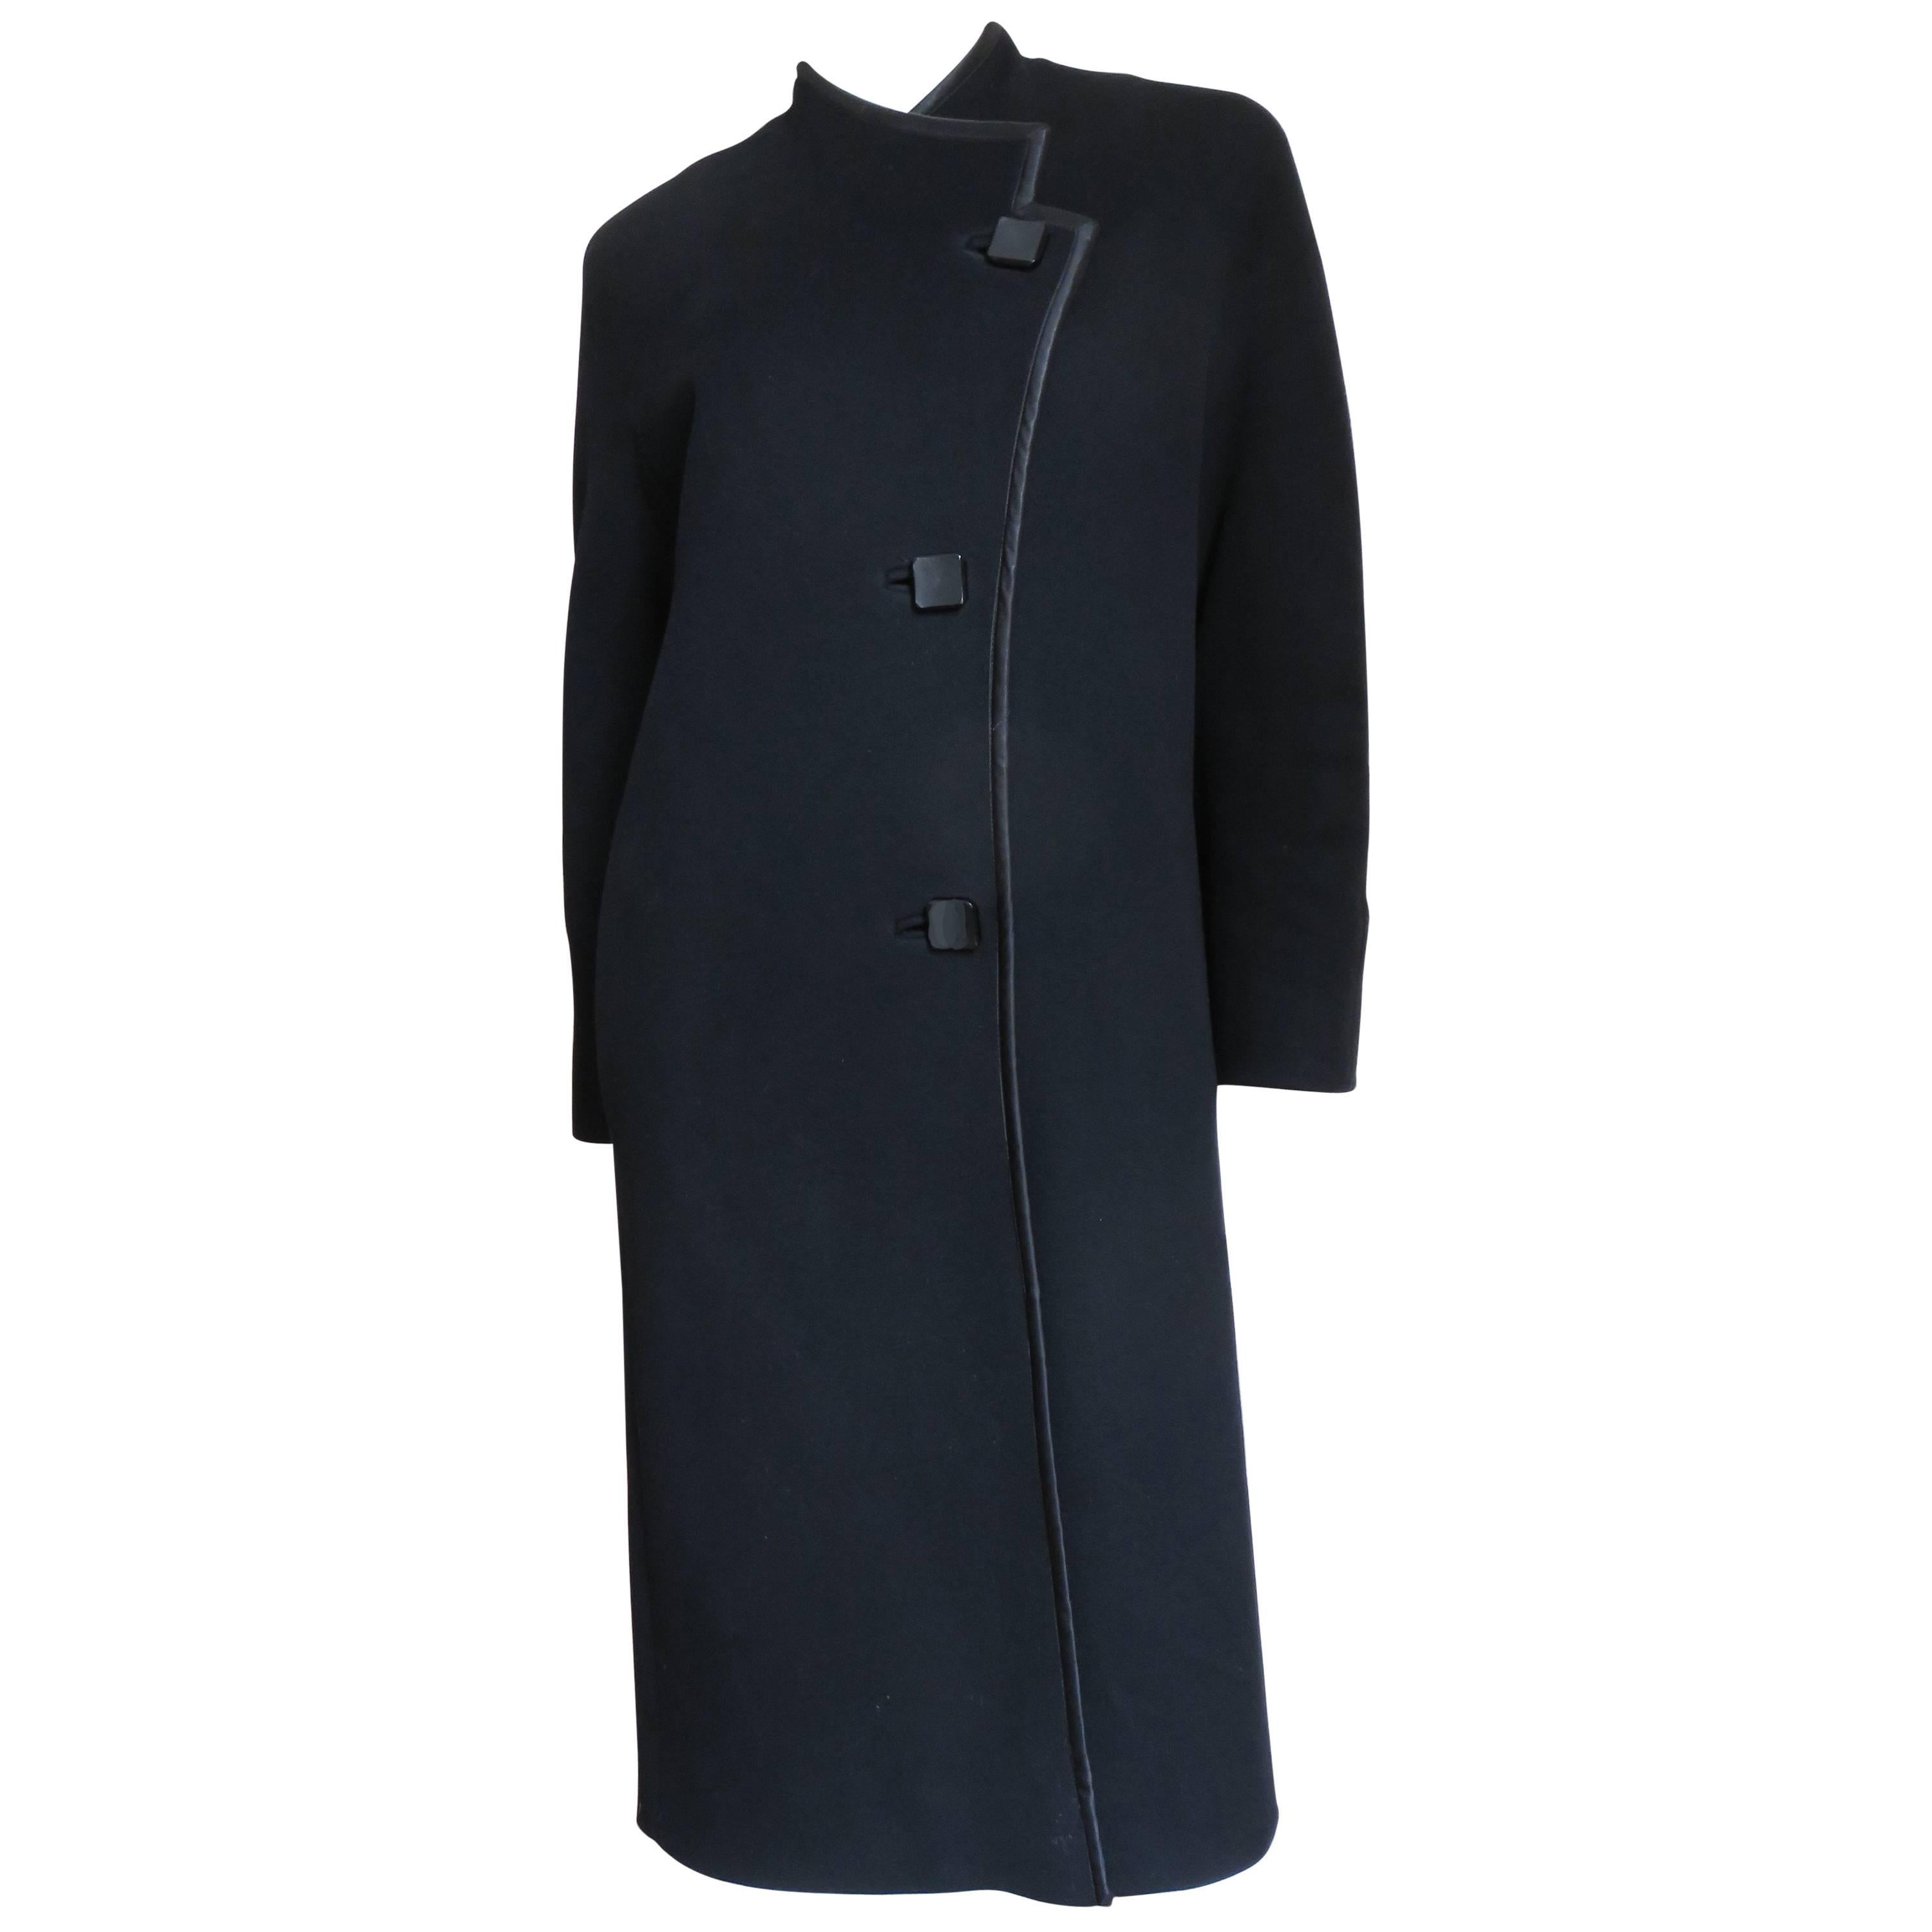 A great black wool coat from Zandra Rhodes.  It has an asymmetric front closing with three square buttons and bound buttonholes.  Cleverly the sleeves and stand up collar are cut in one piece with front and back of the coat creating modest dolman